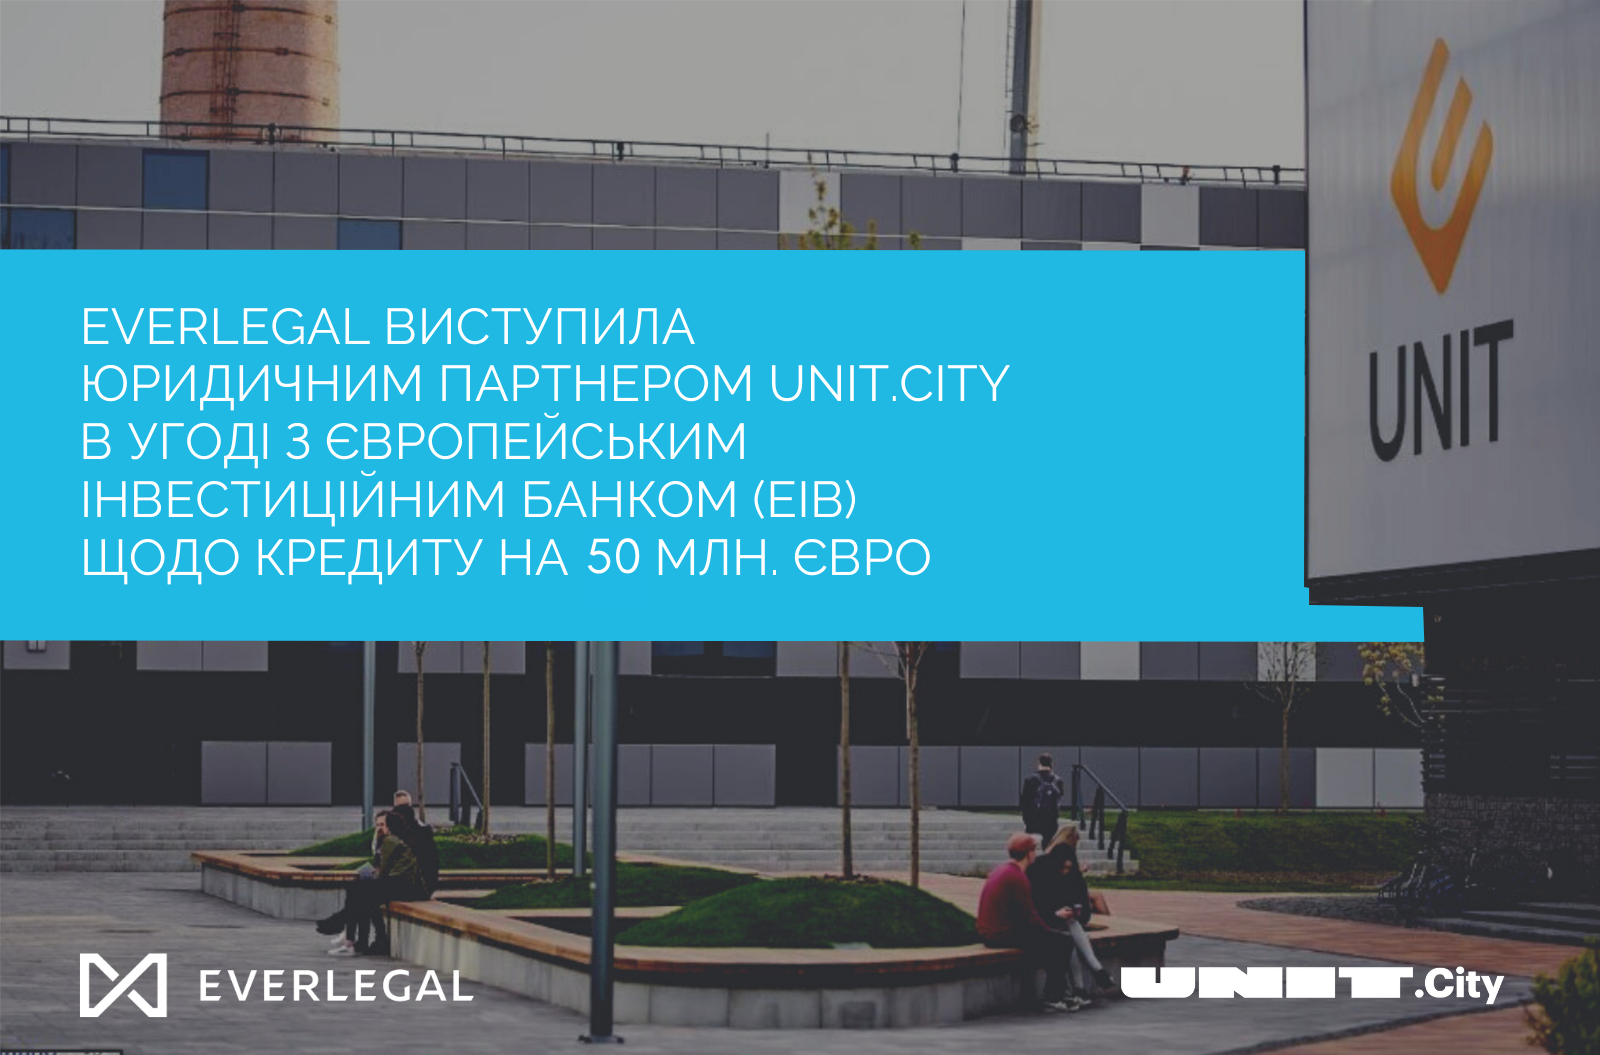 EVERLEGAL acted as a legal partner of UNIT.City in an EUR 50 million finance contract with EIB